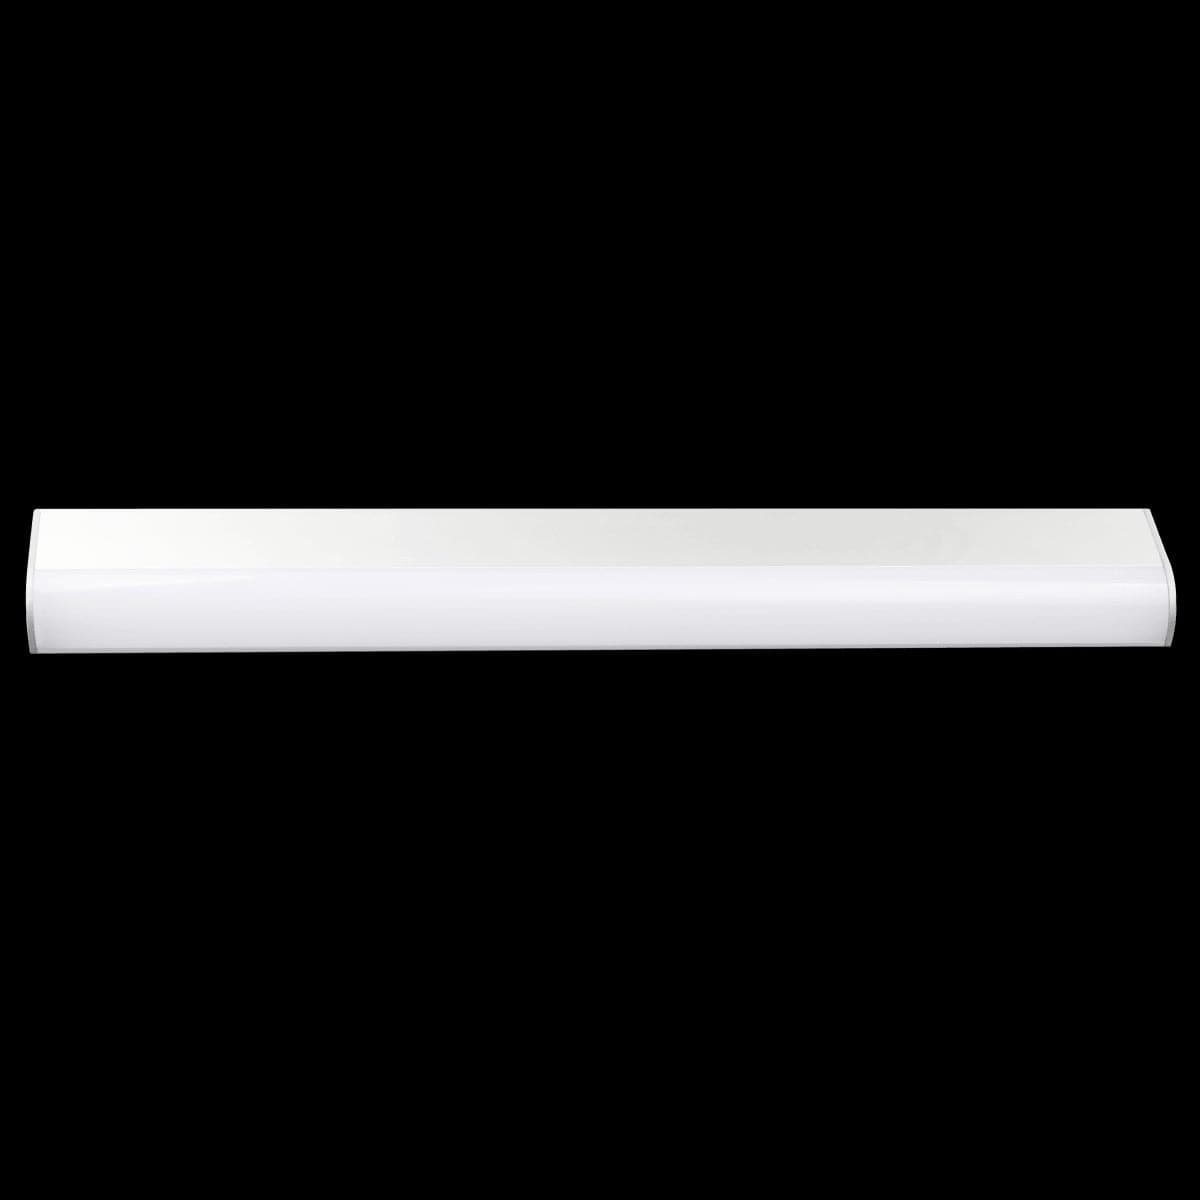 MELFI 40 CM LED 3.8W NATURAL LIGHT EXTENSION DIMMABLE - best price from Maltashopper.com BR420005643